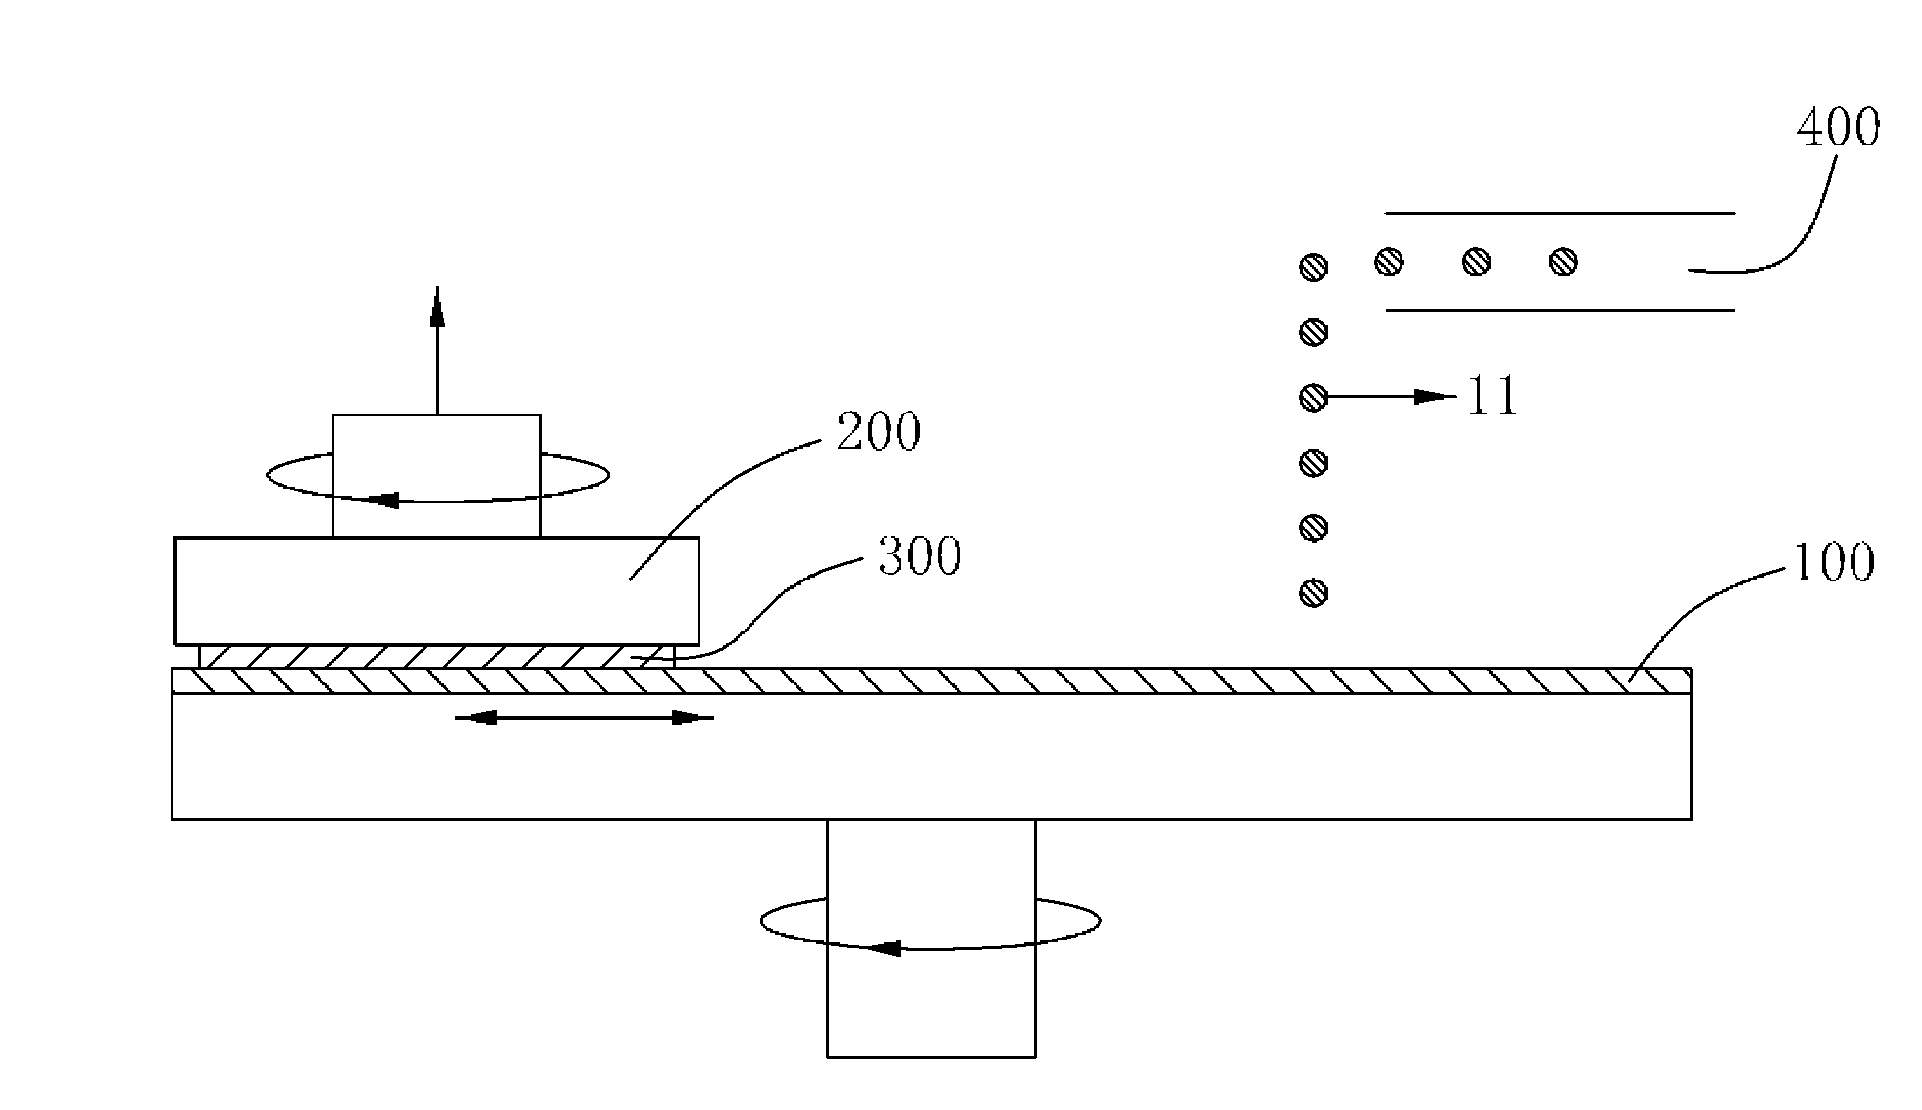 WCMP (wolfram chemical mechanical polishing) grinding device and method for improving WCMP grinding rate